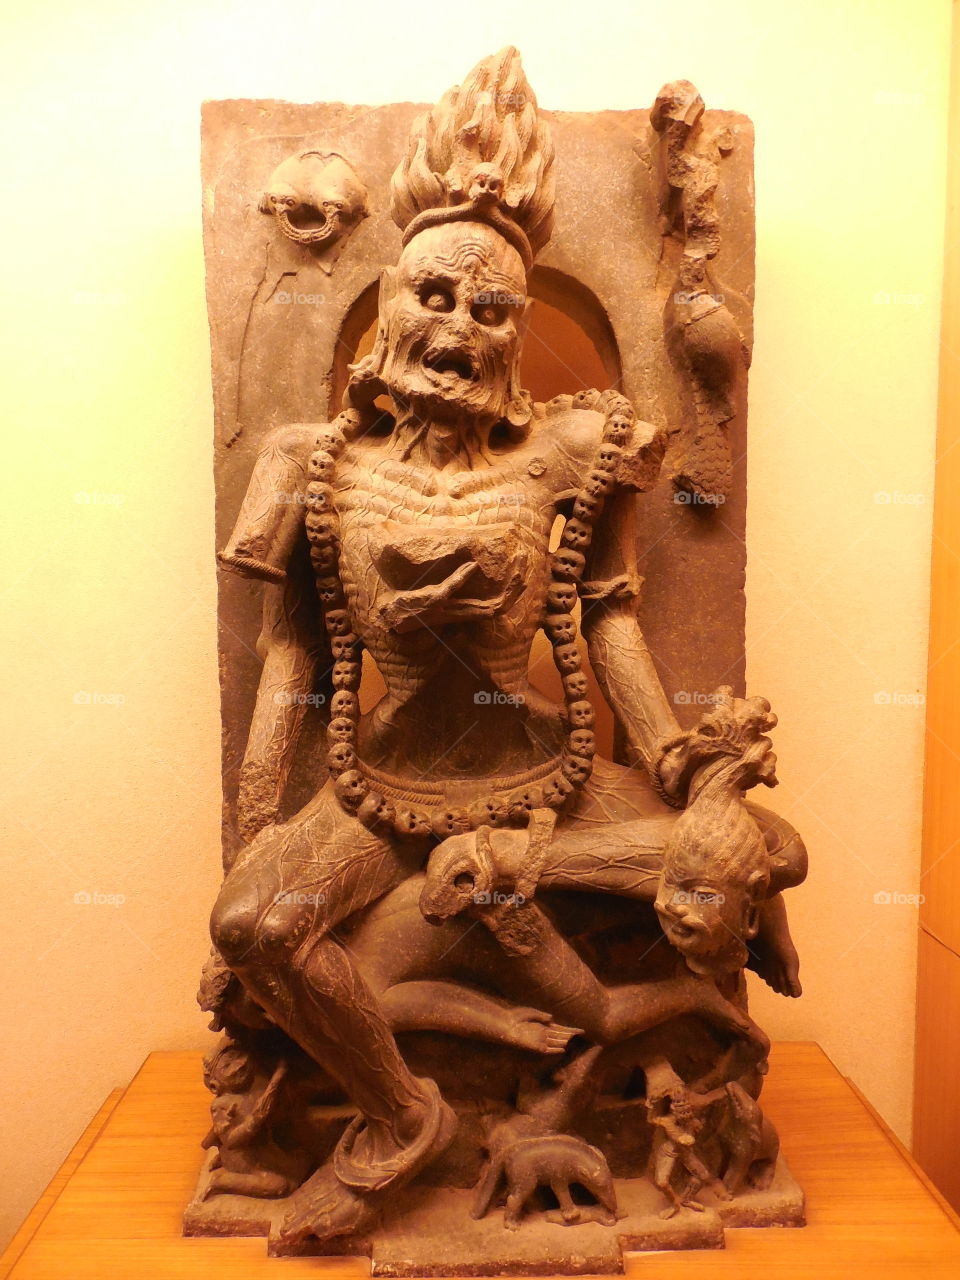 photography is an art.
This photo is taken in a museum. place - STATE MUSEUM , BHUBANESWAR , ODISHA , INDIA